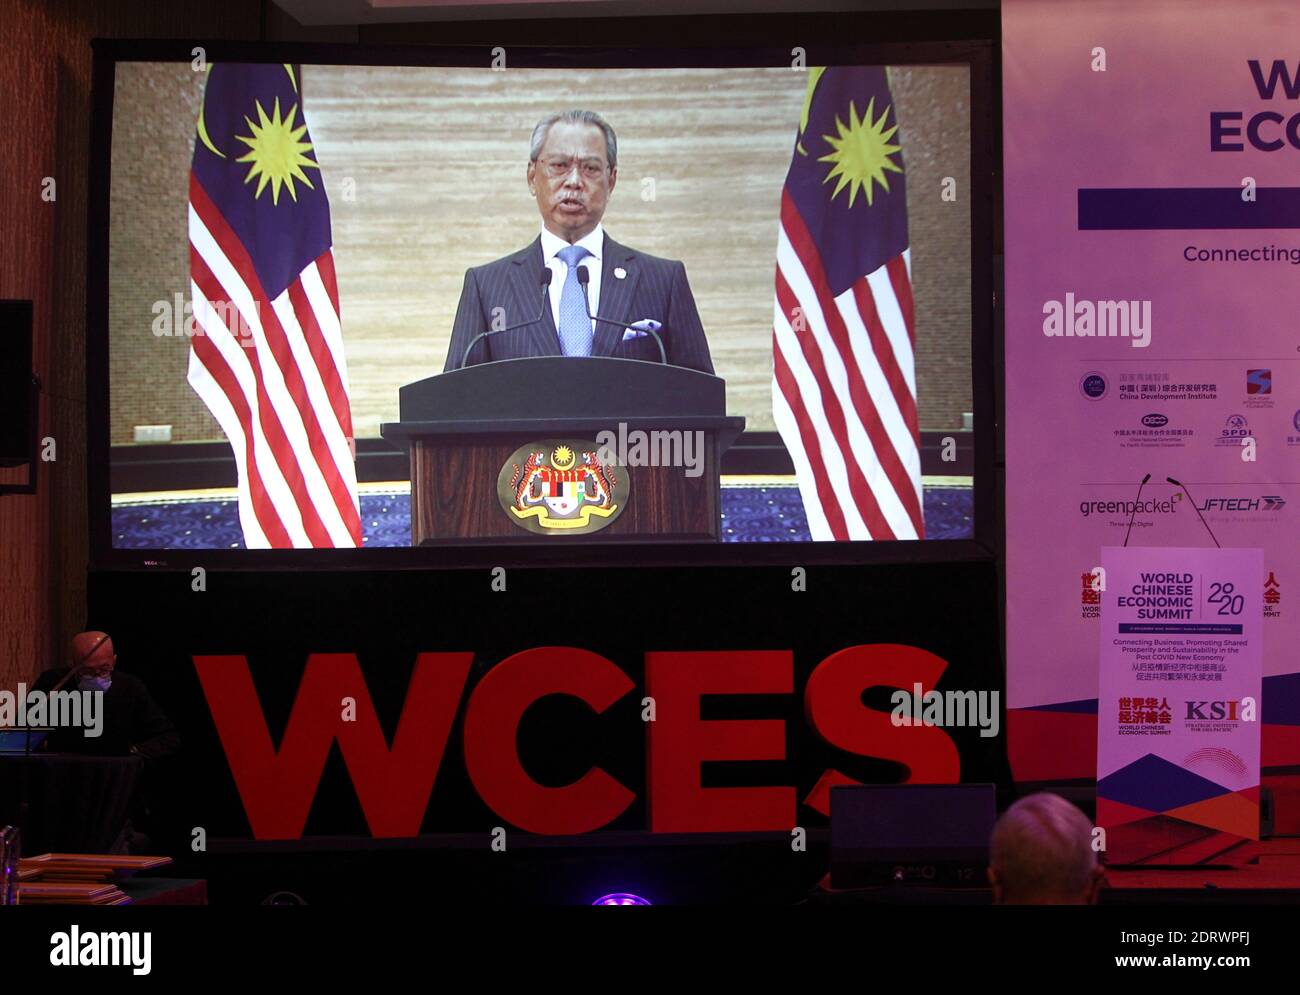 Kuala Lumpur. 21st Dec, 2020. Malaysian Prime Minister Muhyiddin Yassin delivers a speech via video during the World Chinese Economic Summit 2020 in Kuala Lumpur, Malaysia, Dec. 21, 2020. China has played a significant role in upholding the international trading system and opposing protectionism and unilateralism since the outbreak of COVID-19, Malaysian Prime Minister Muhyiddin Yassin said on Monday.TO GO WITH 'China has played significant role in upholding int'l trading system: Malaysian PM' Credit: Xinhua/Alamy Live News Stock Photo